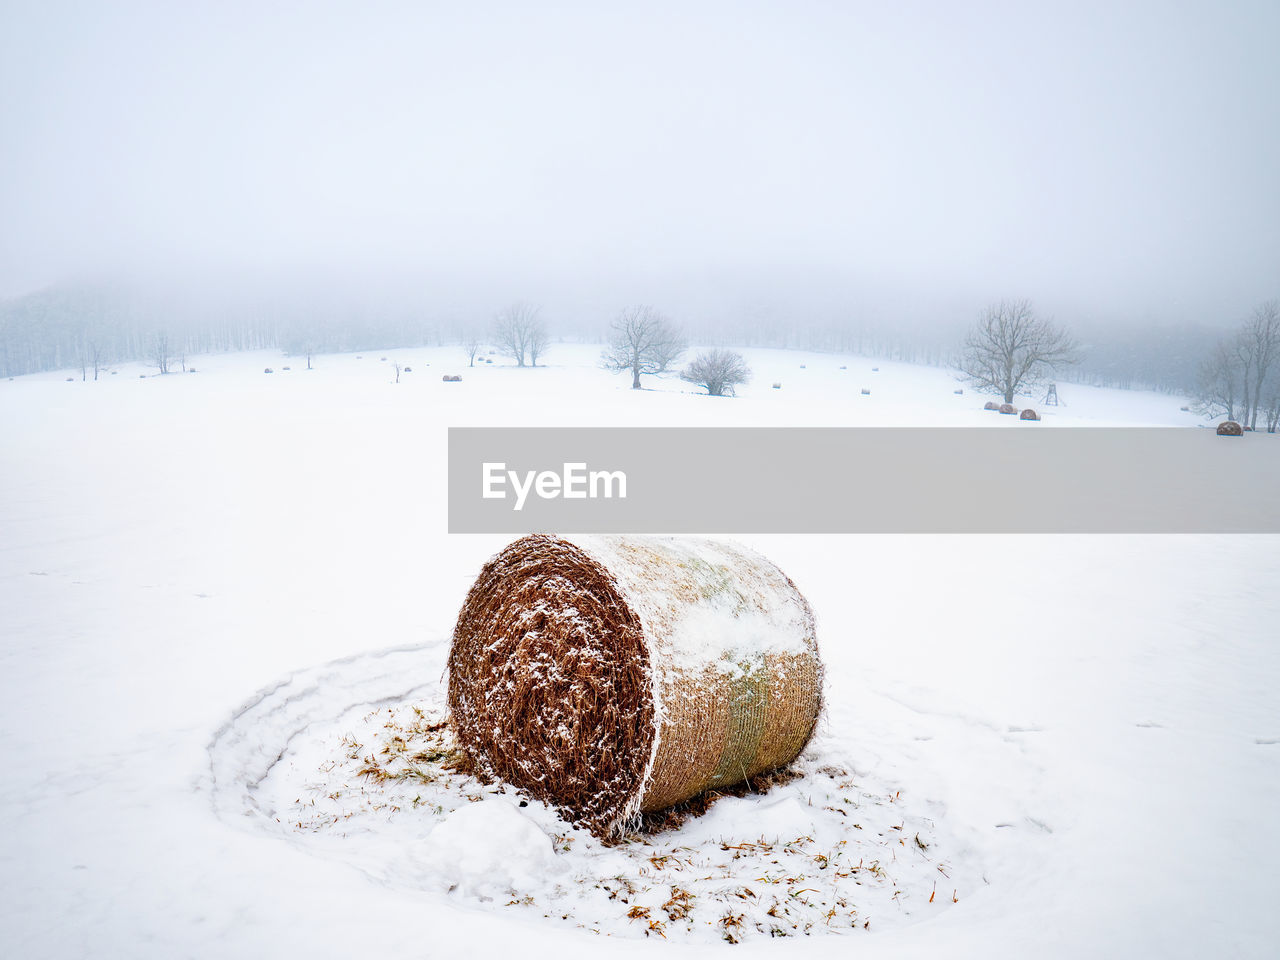 Lost hay bale in snow. frosty and snowy winter in countryside, misty snowfalling day